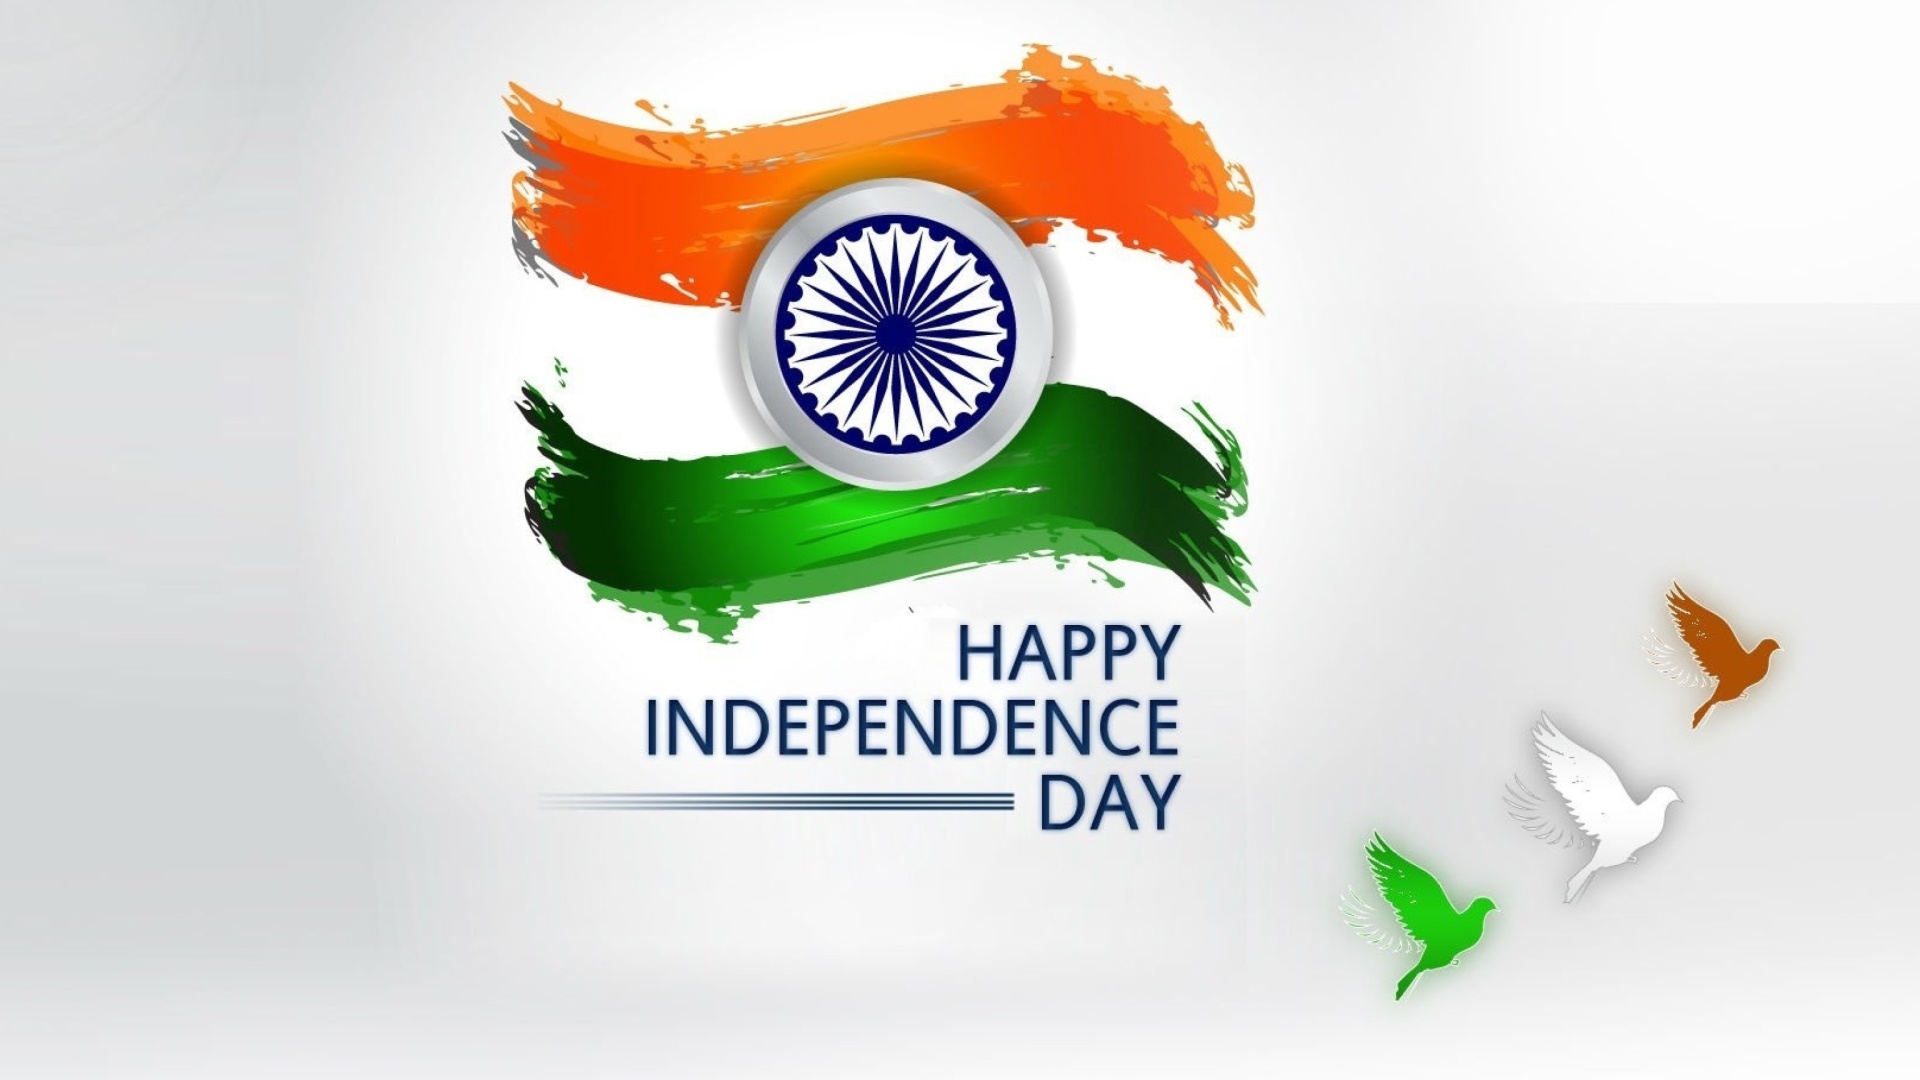 Independence Day India wallpaper 1920x1080